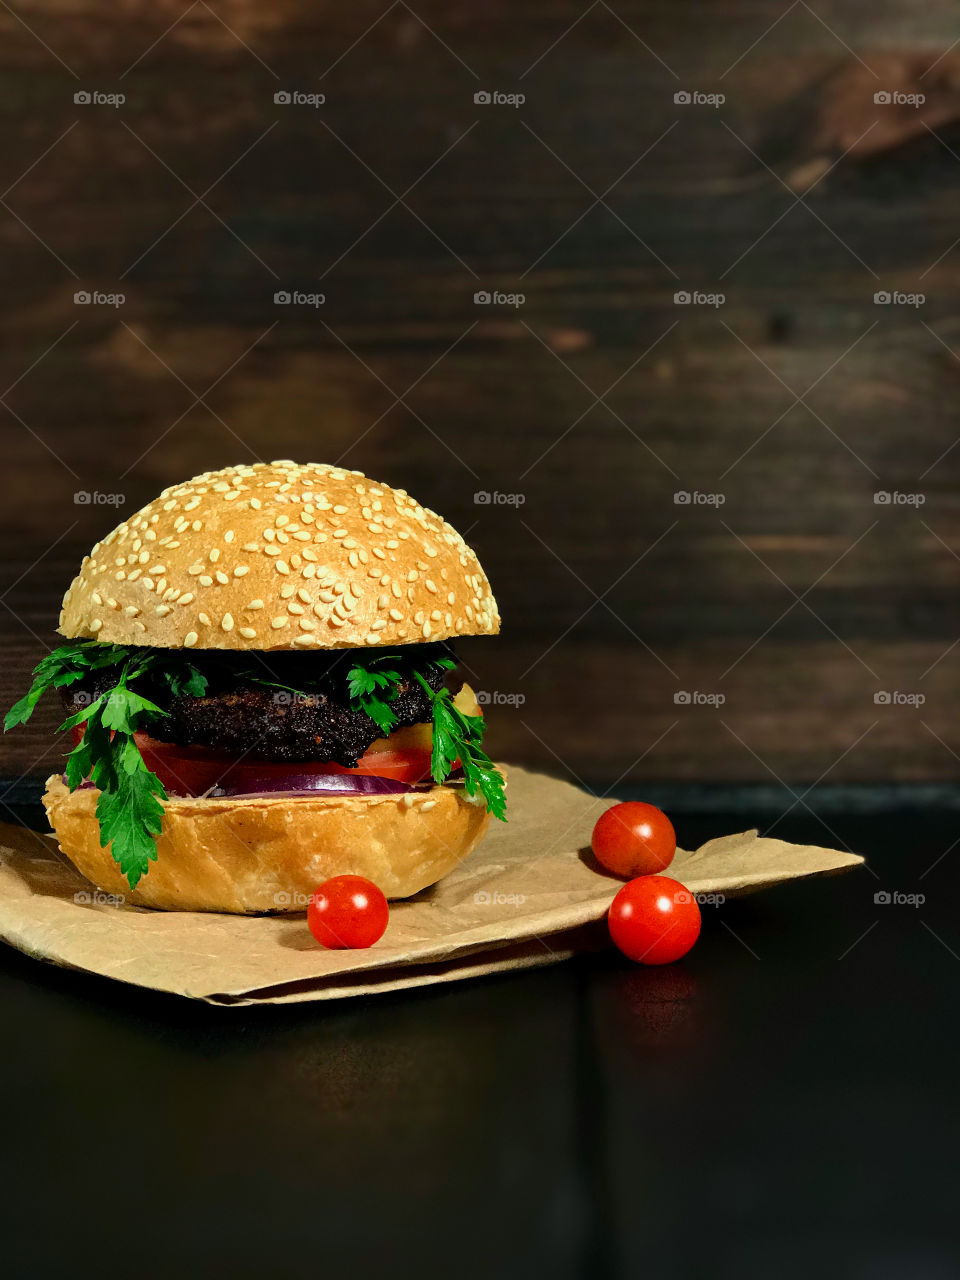 delicious hamburger with bun, served on the board with a small red cherry tomatoes